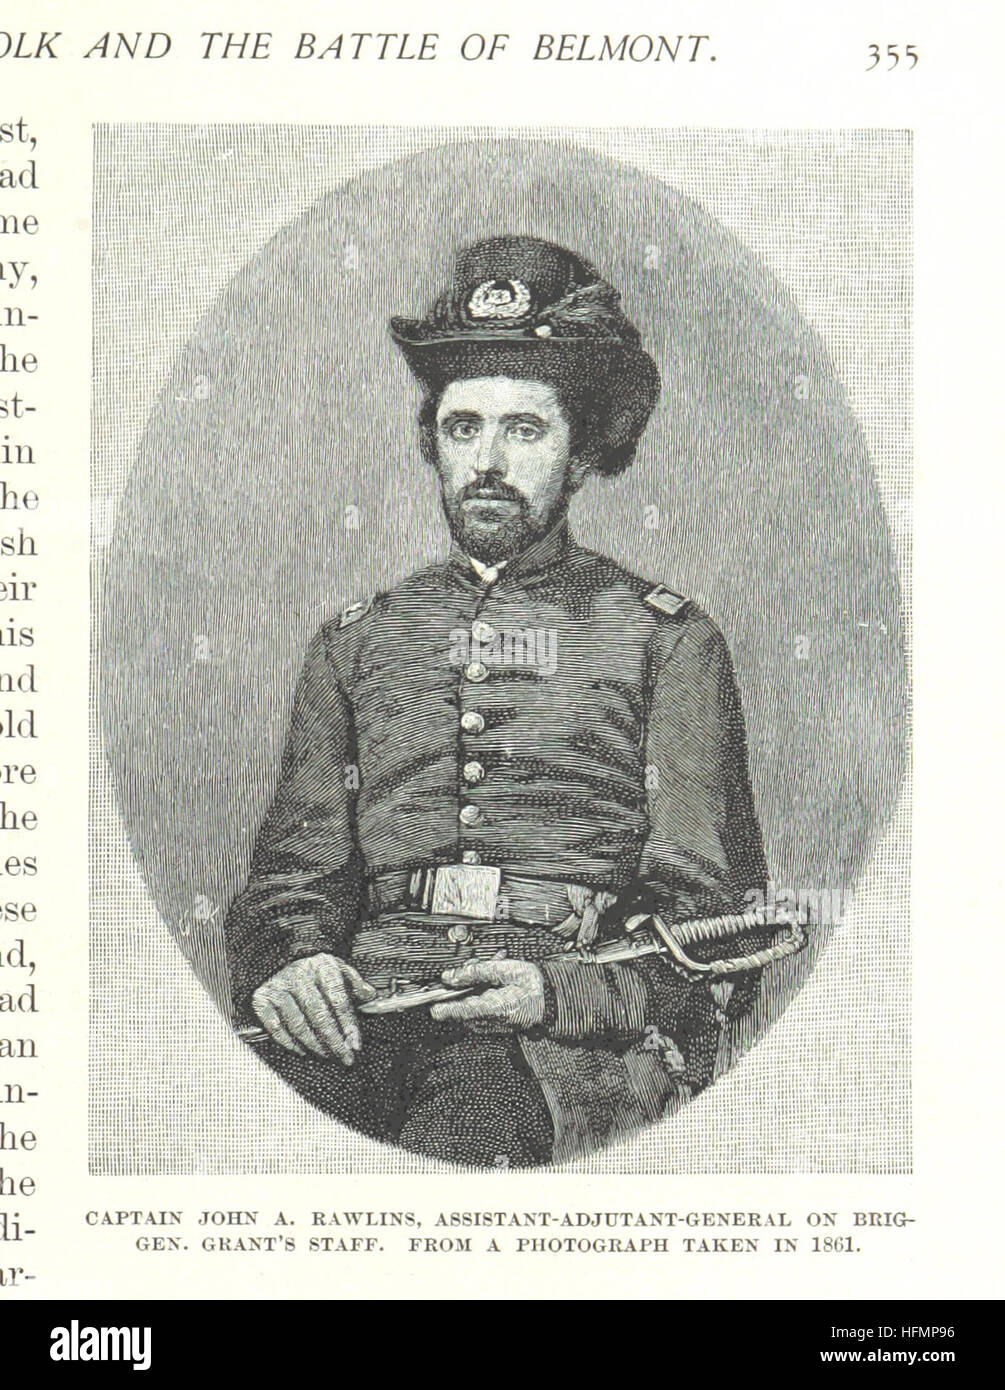 Image taken from page 385 of 'Battles and Leaders of the Civil War, being for the most part contributions by Union and Confederate officers, based upon “the Century War Series.” Edited by R. U. J. and C. C. B., etc. [Illustrated.]' Image taken from page 385 of 'Battles and Leaders of Stock Photo